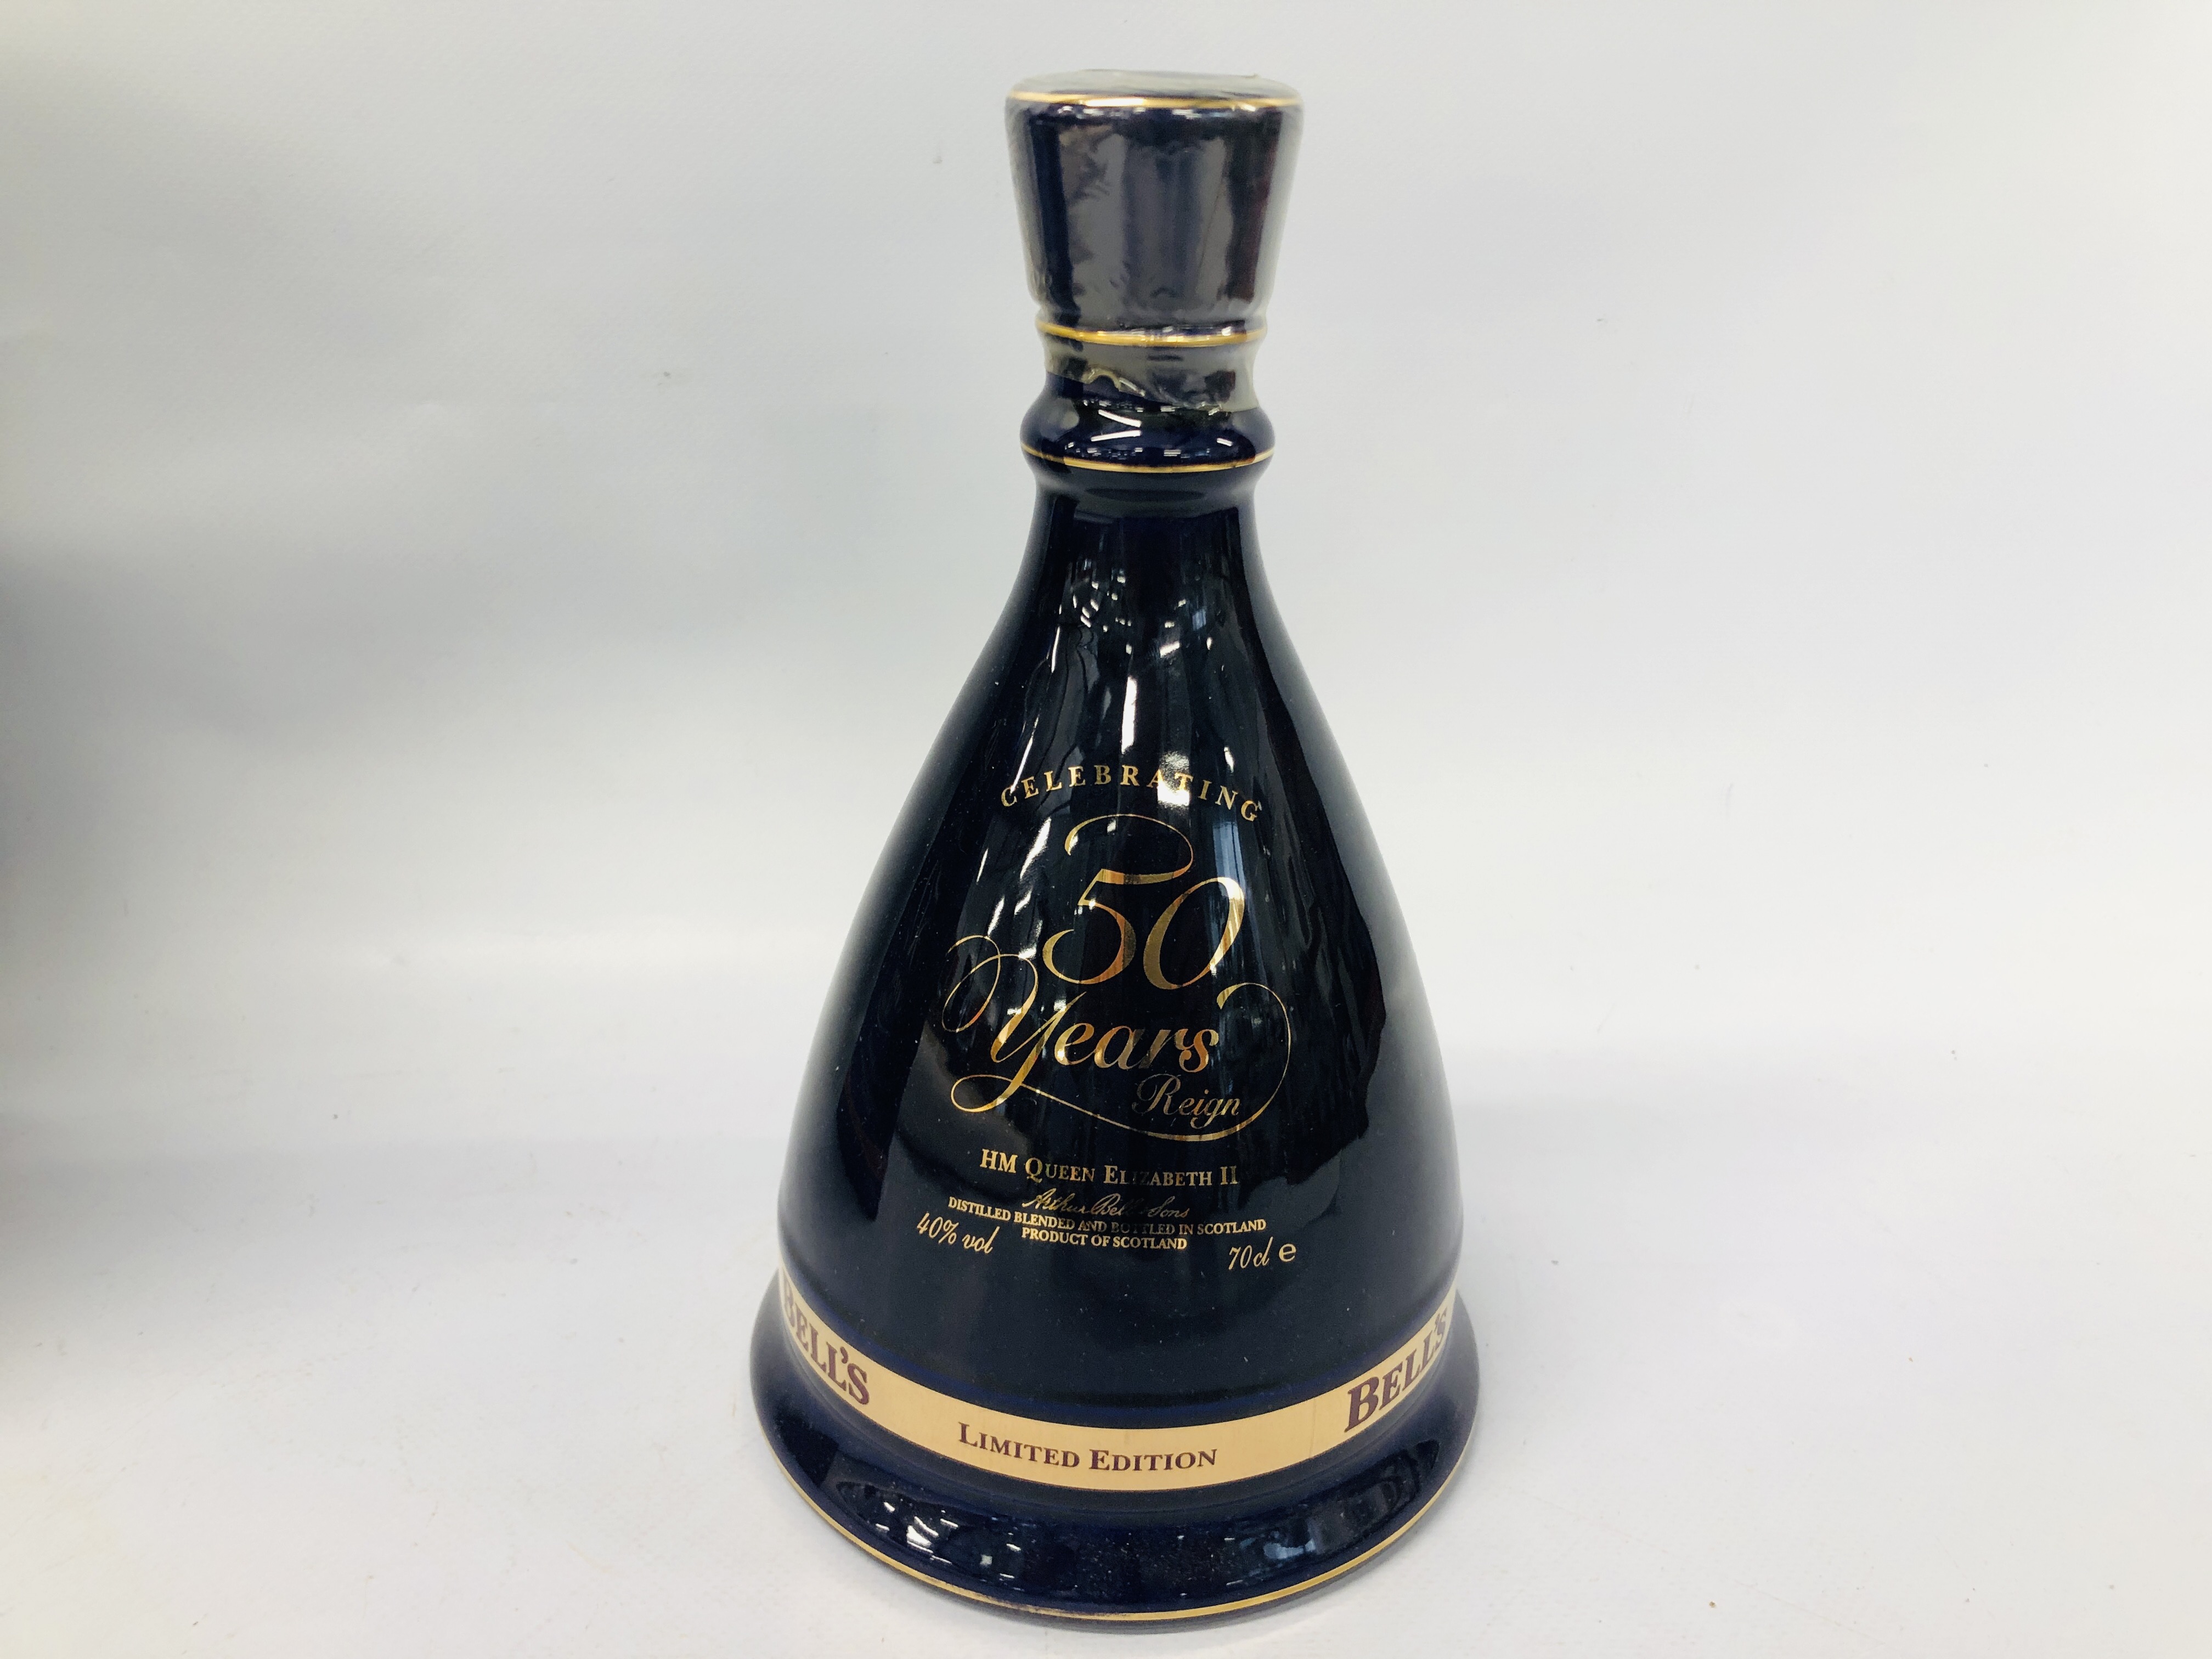 BELLS EXTRA SPECIAL OLD SCOTCH WHISKY LIMITED EDITION GOLD JUBILEE DECANTER 70CL (BOXED) - Image 2 of 4